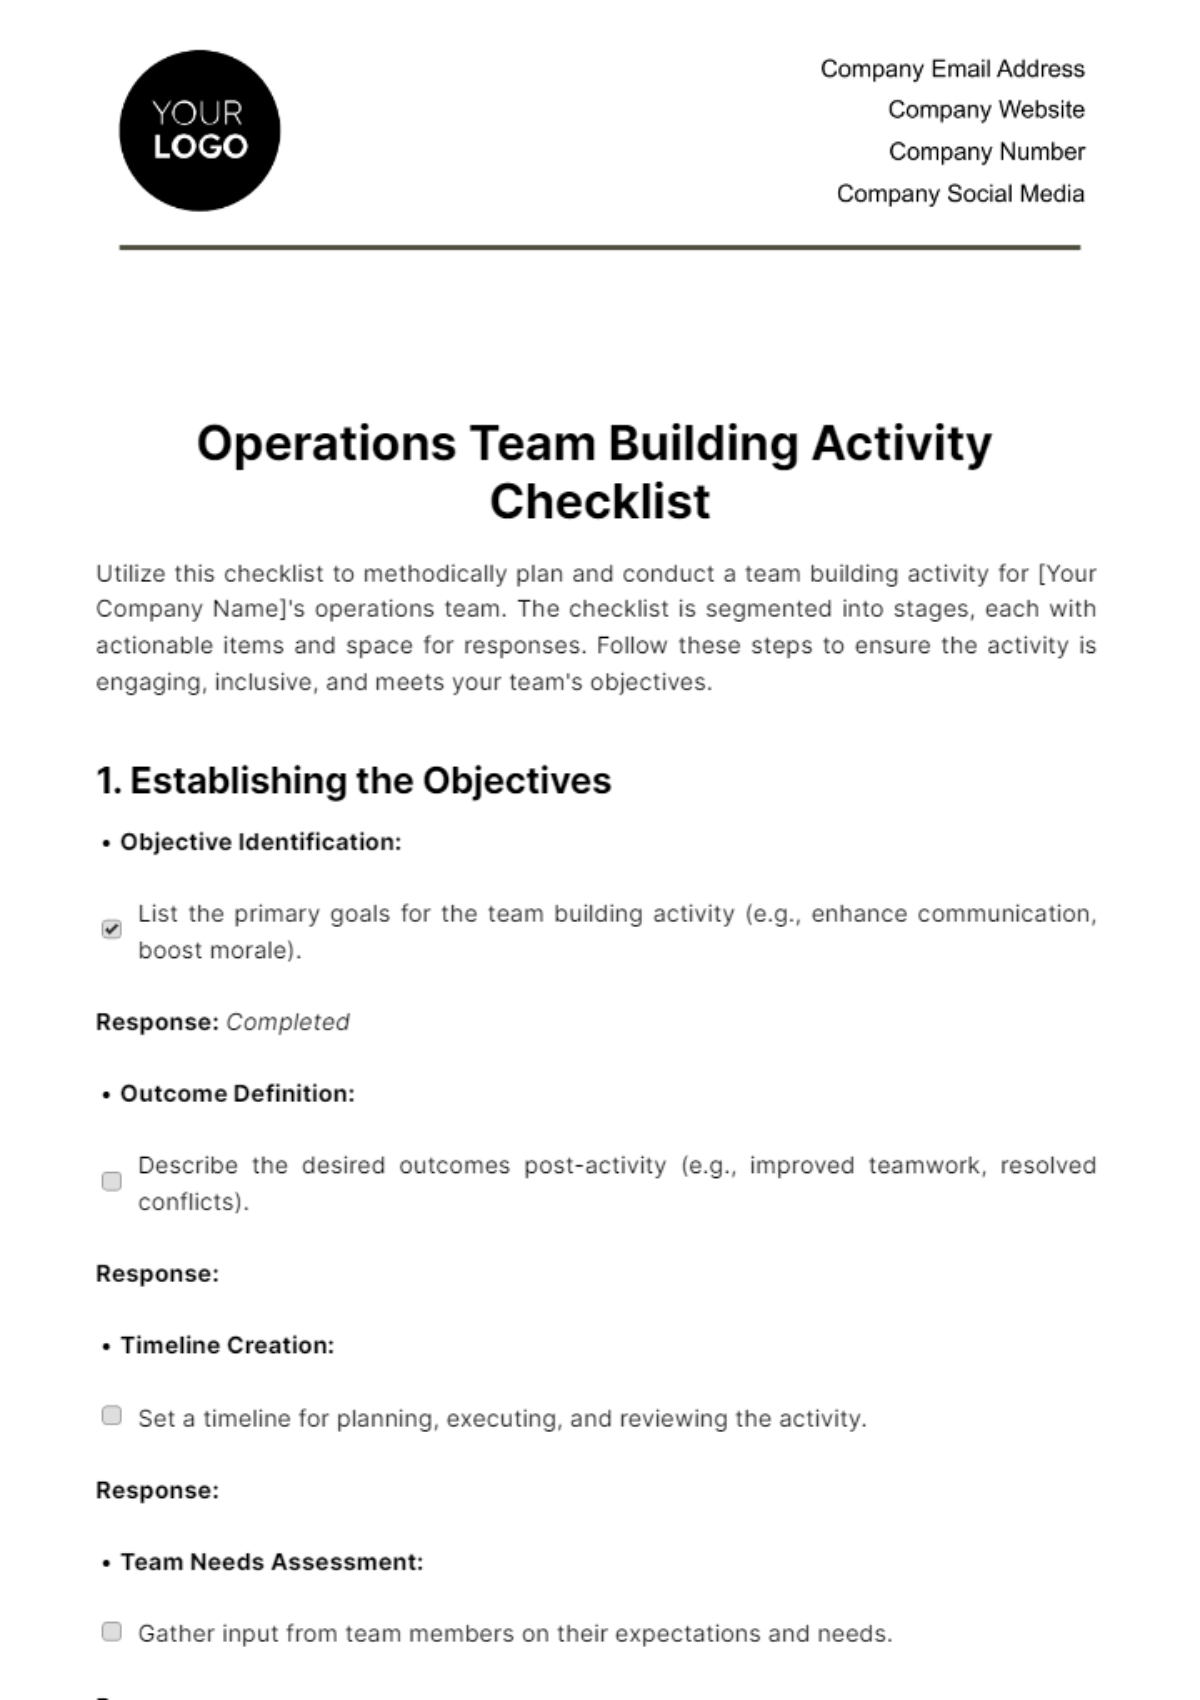 Free Operations Team Building Activity Checklist Template